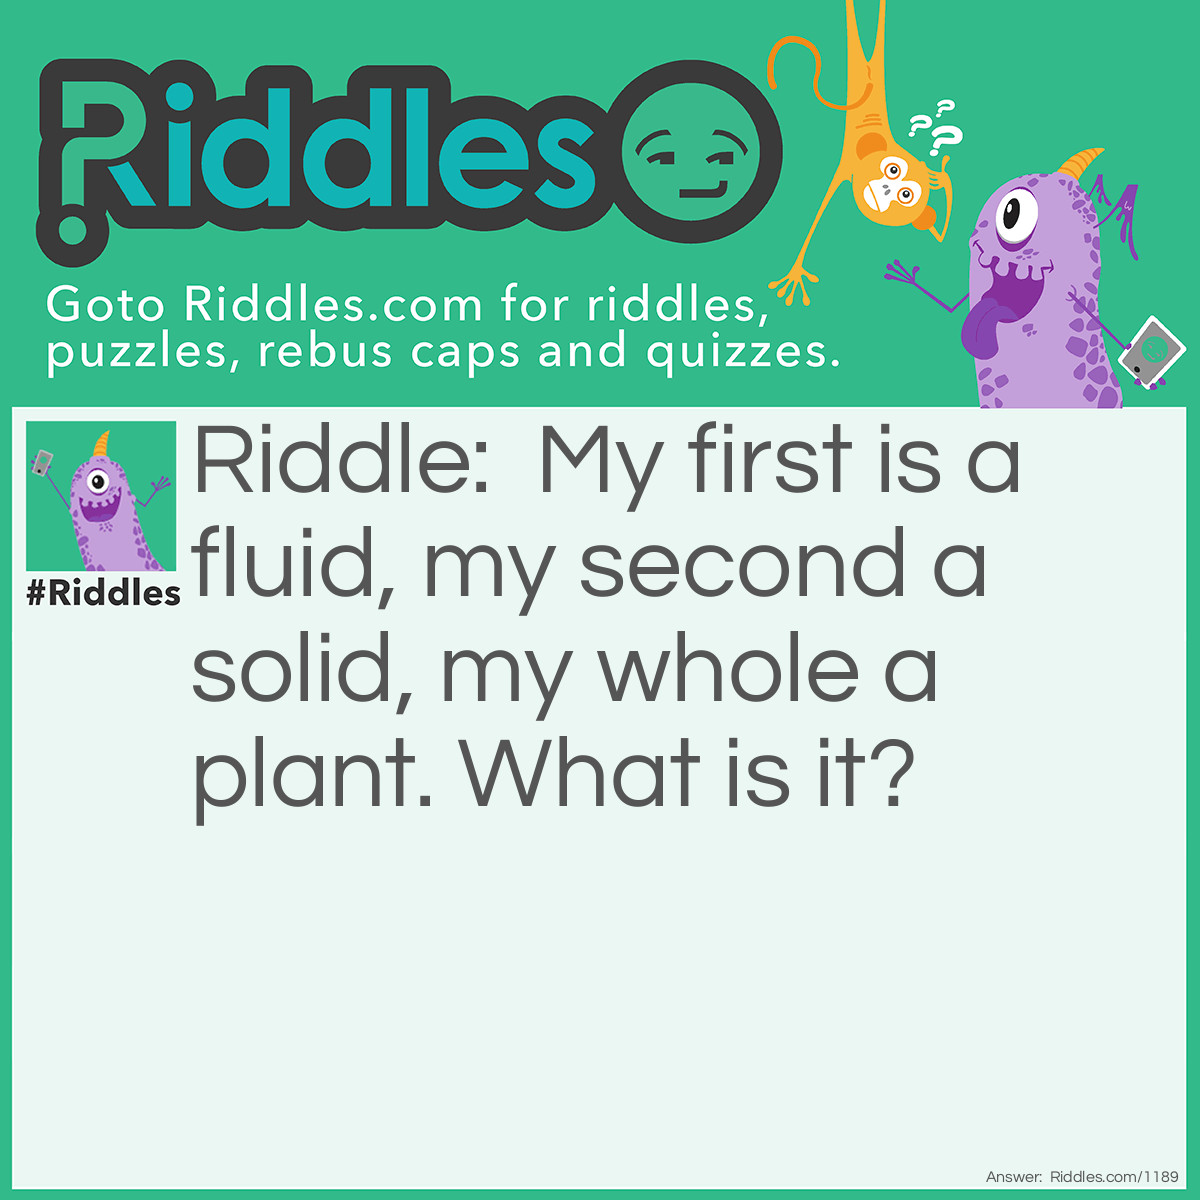 Riddle: My first is a fluid, my second a solid, my whole a plant. What is it? Answer: Liquorice.